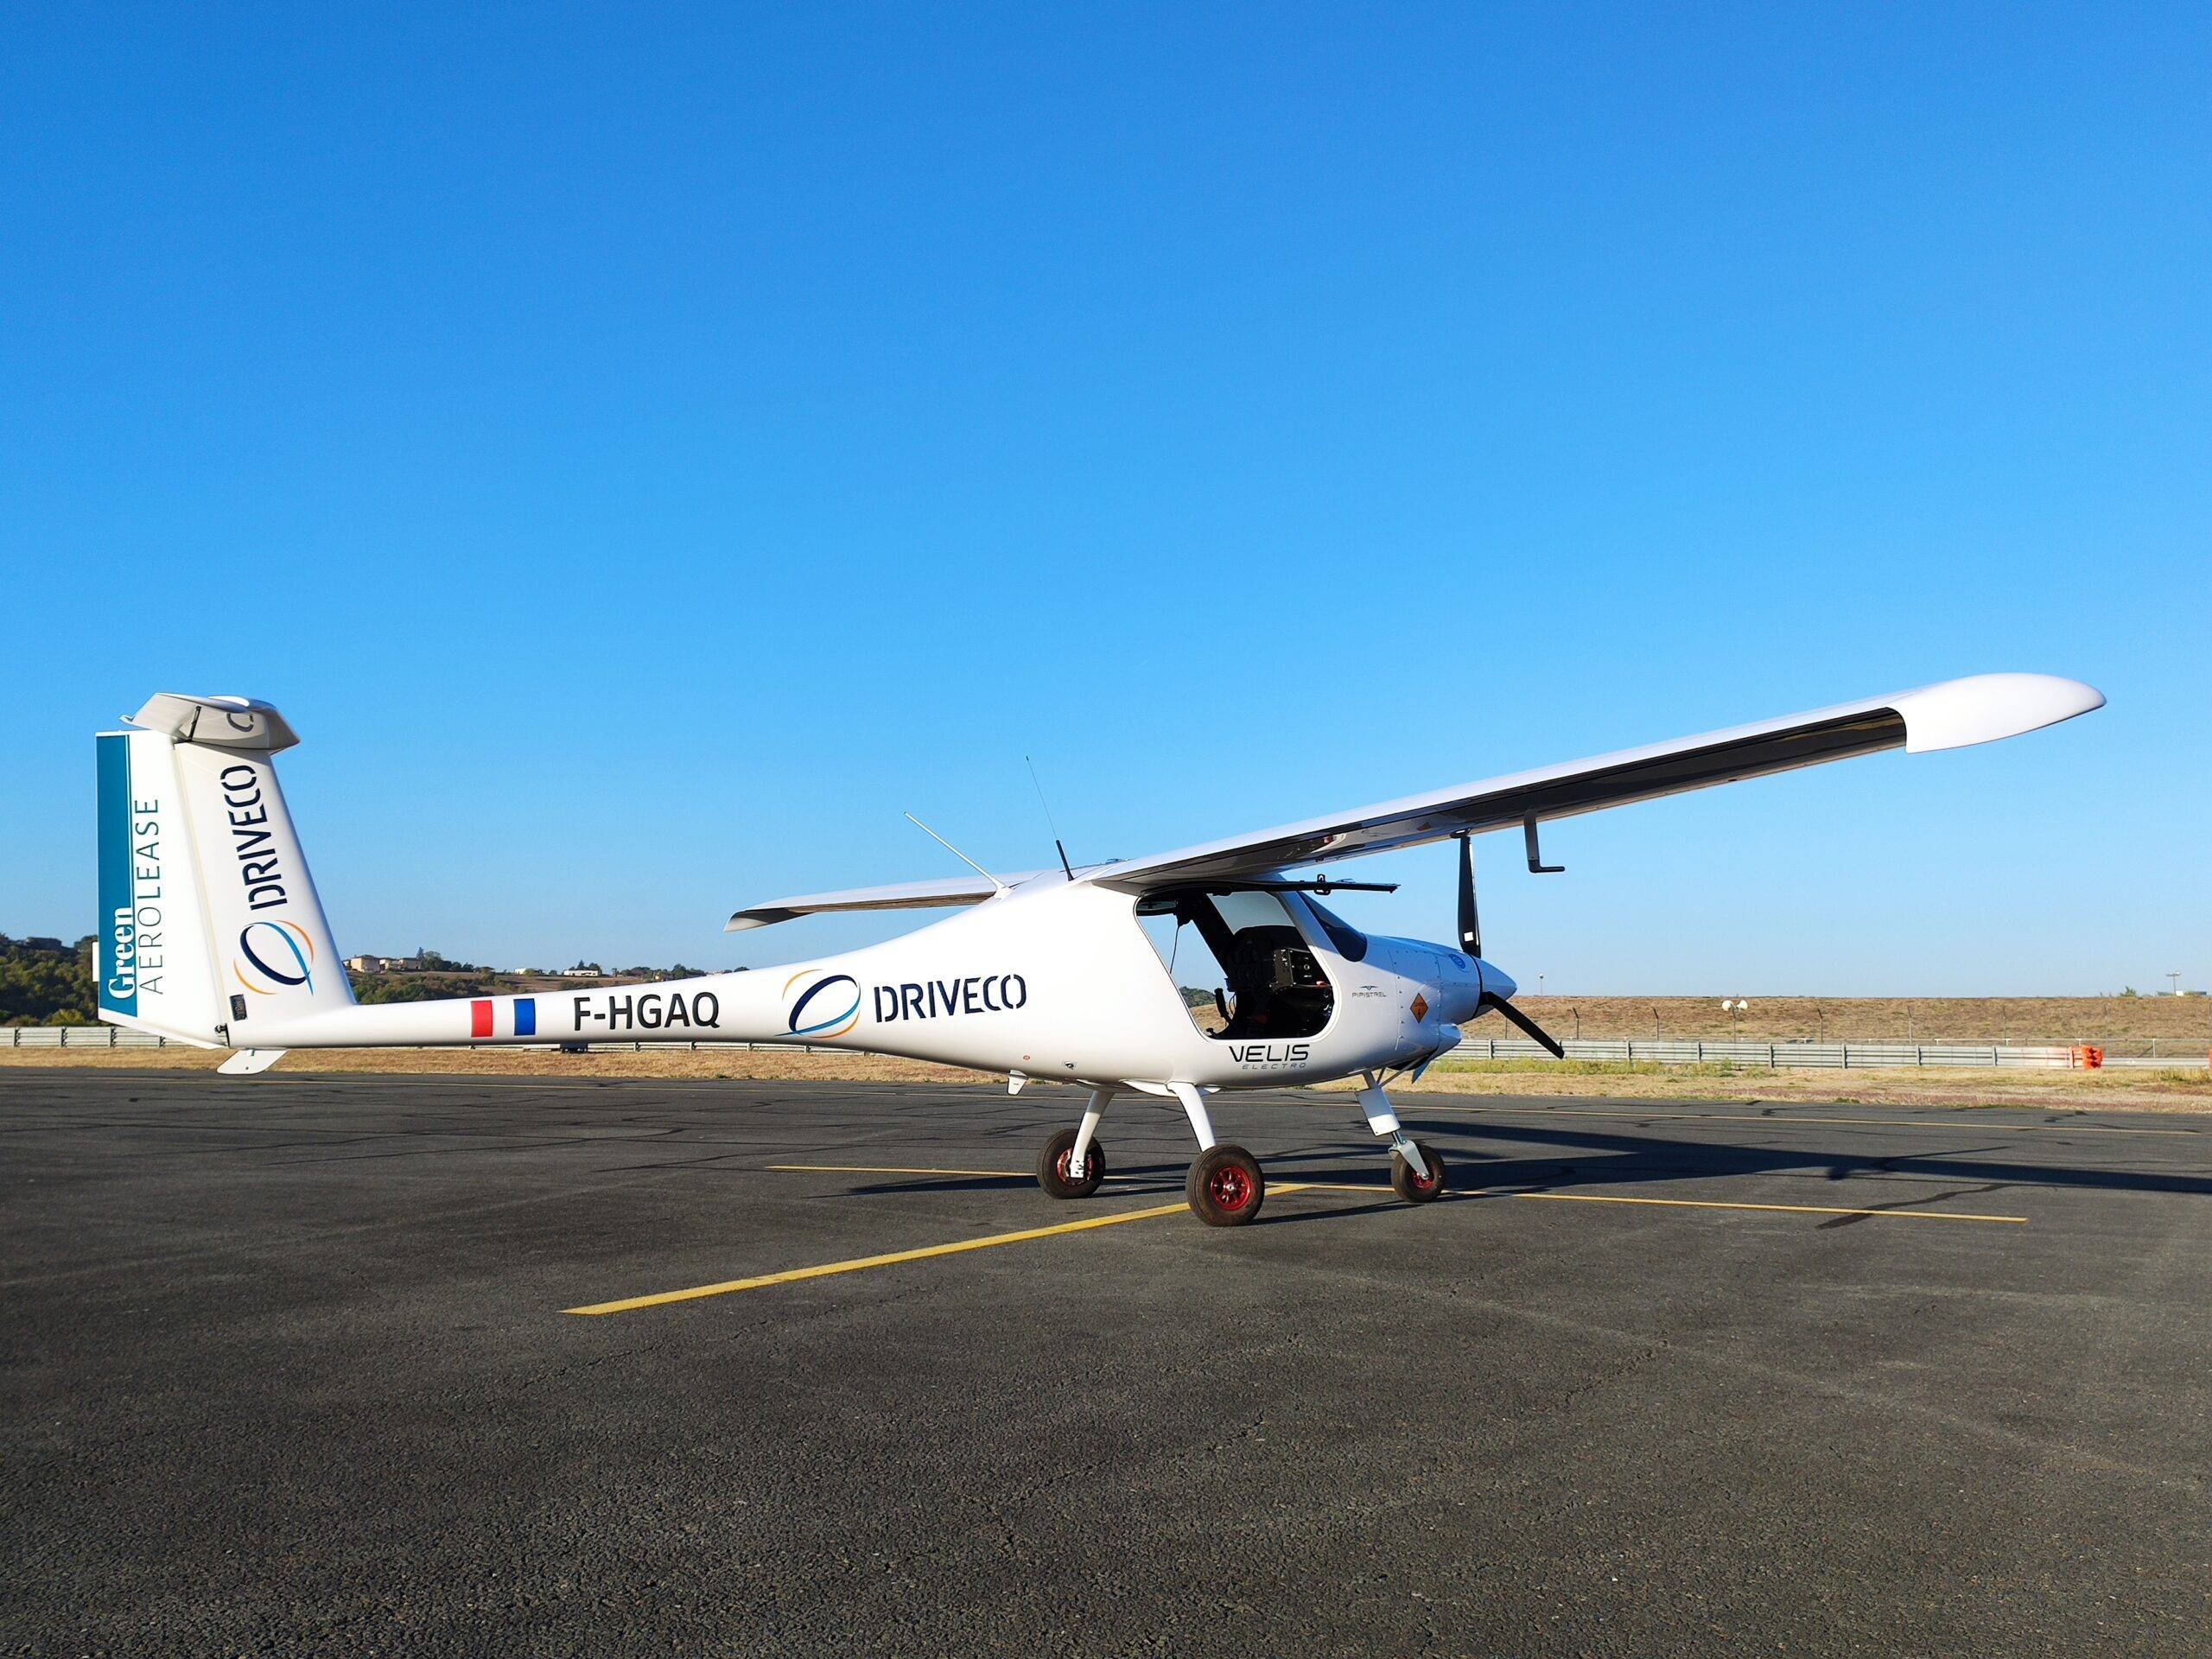 DRIVECO and Green Aerolease announce a partnership to accelerate the deployment of electric aircraft